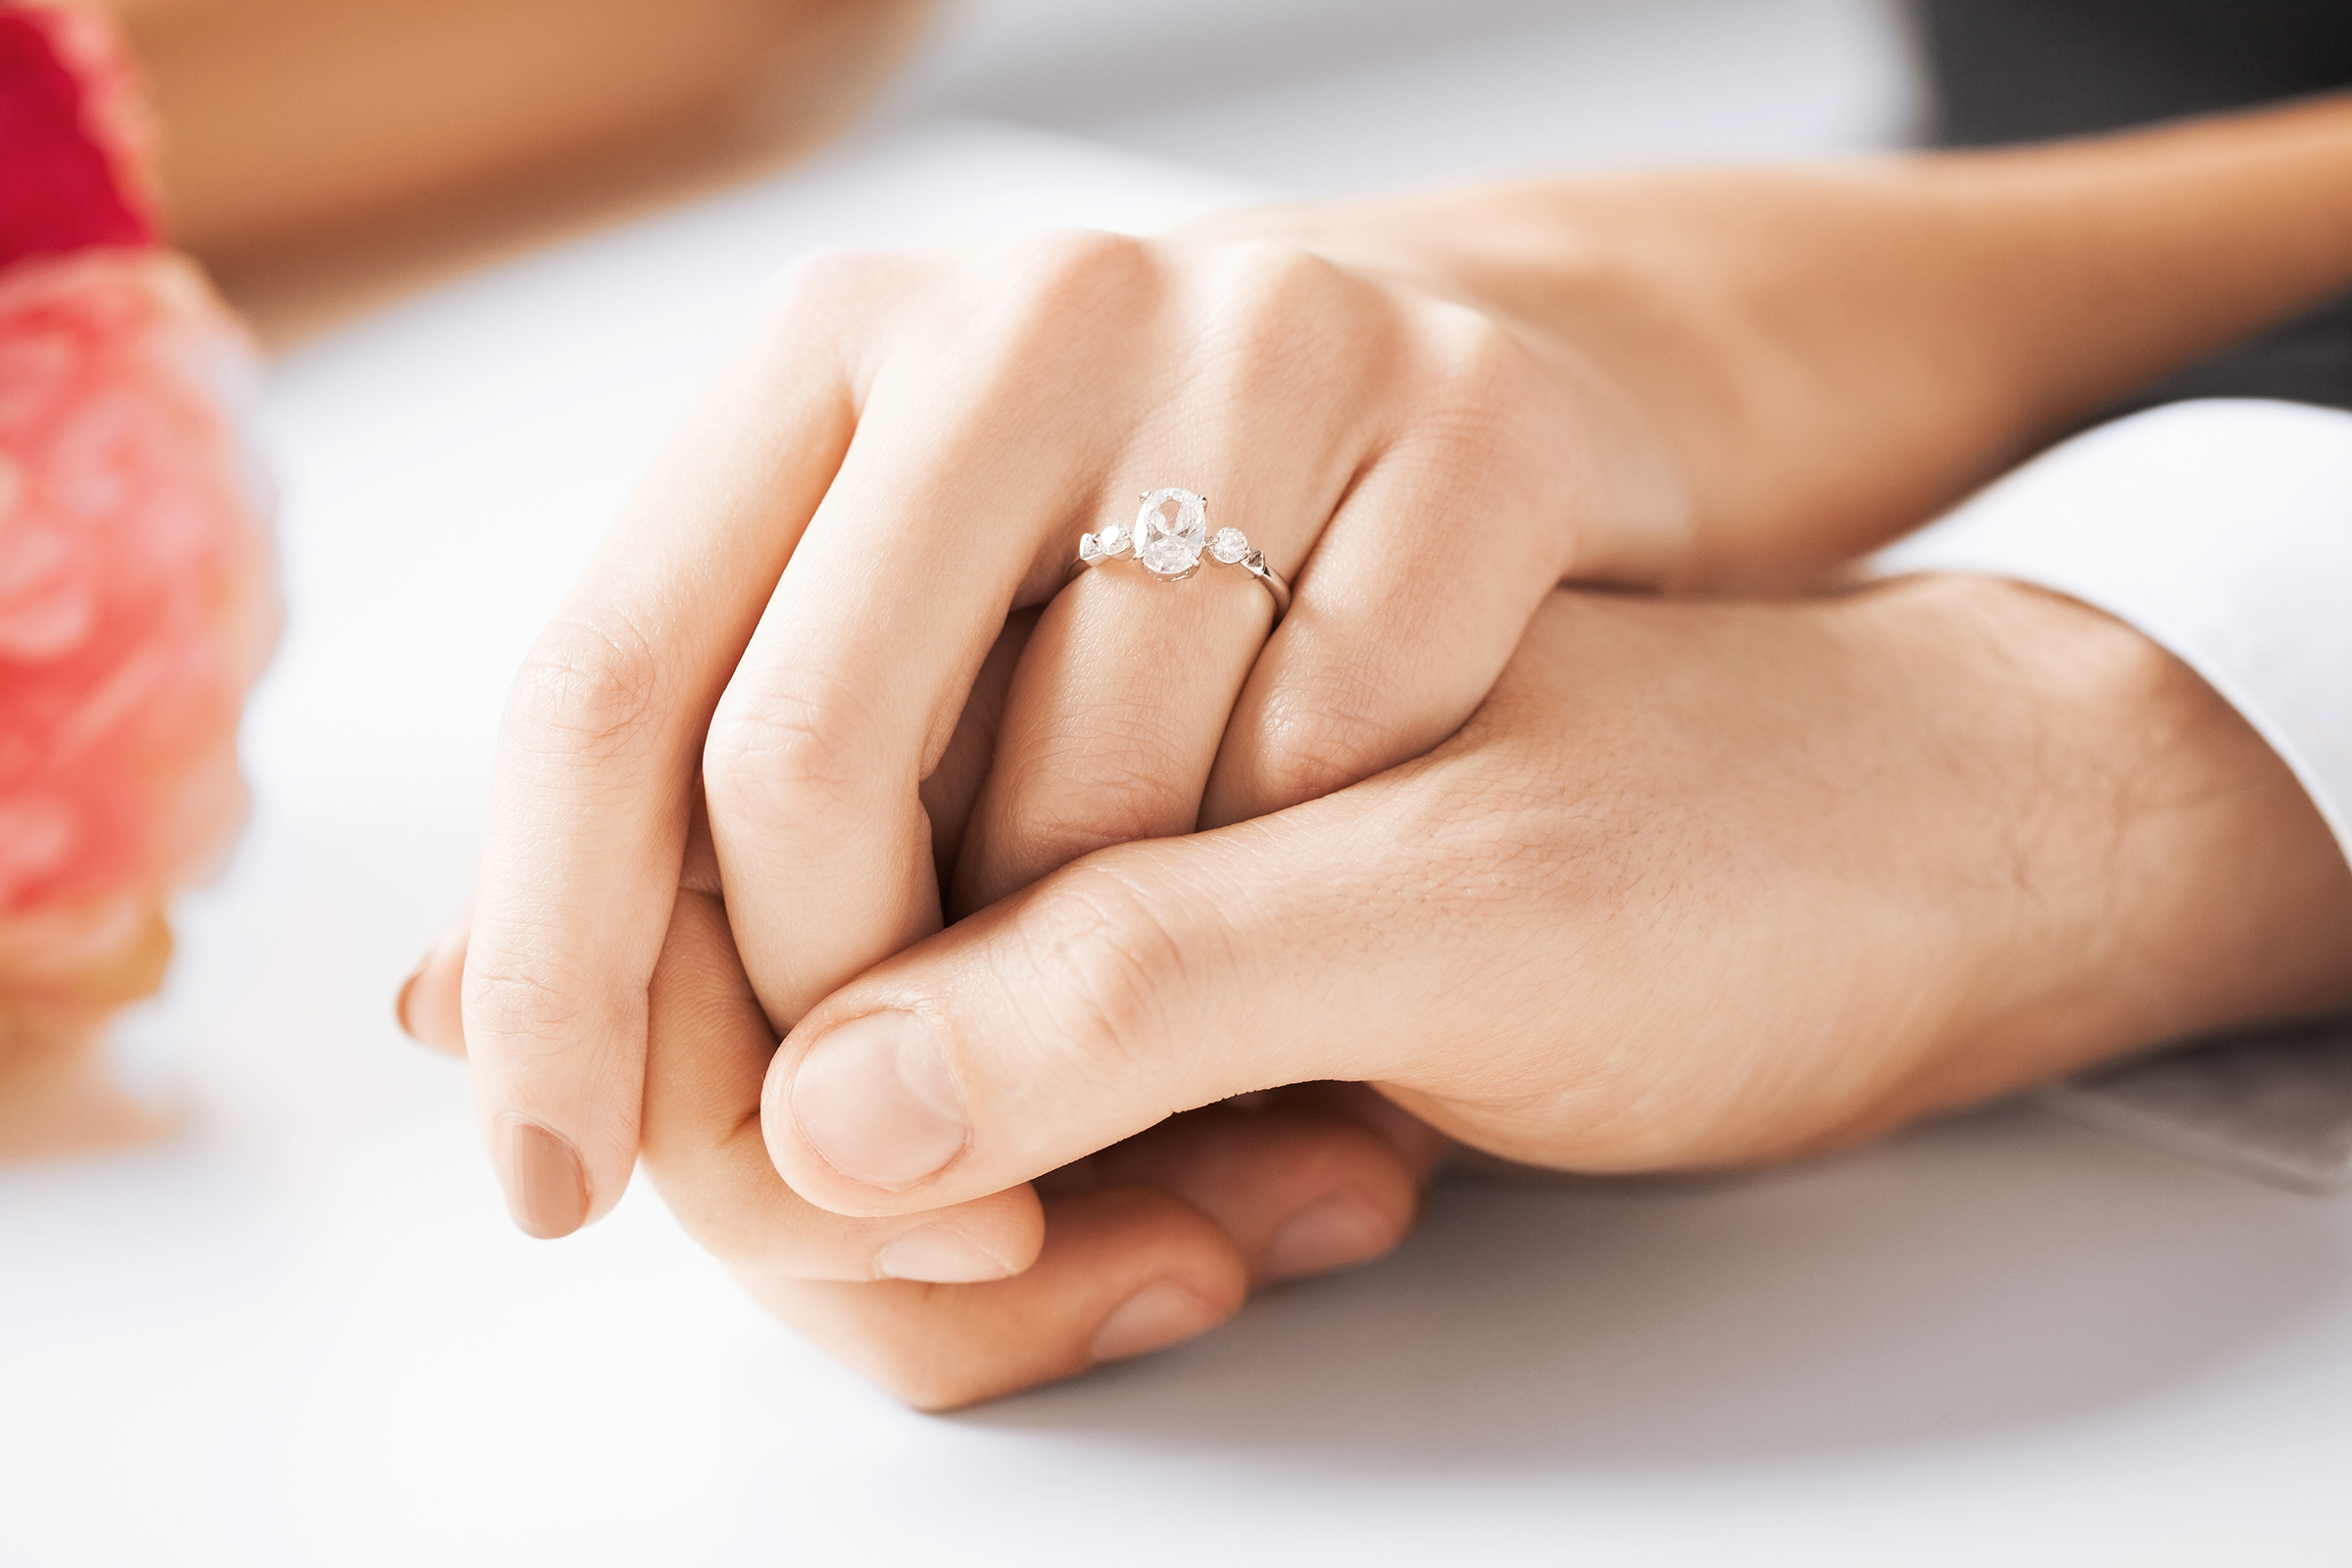 ENGAGEMENT,RING,HANDS